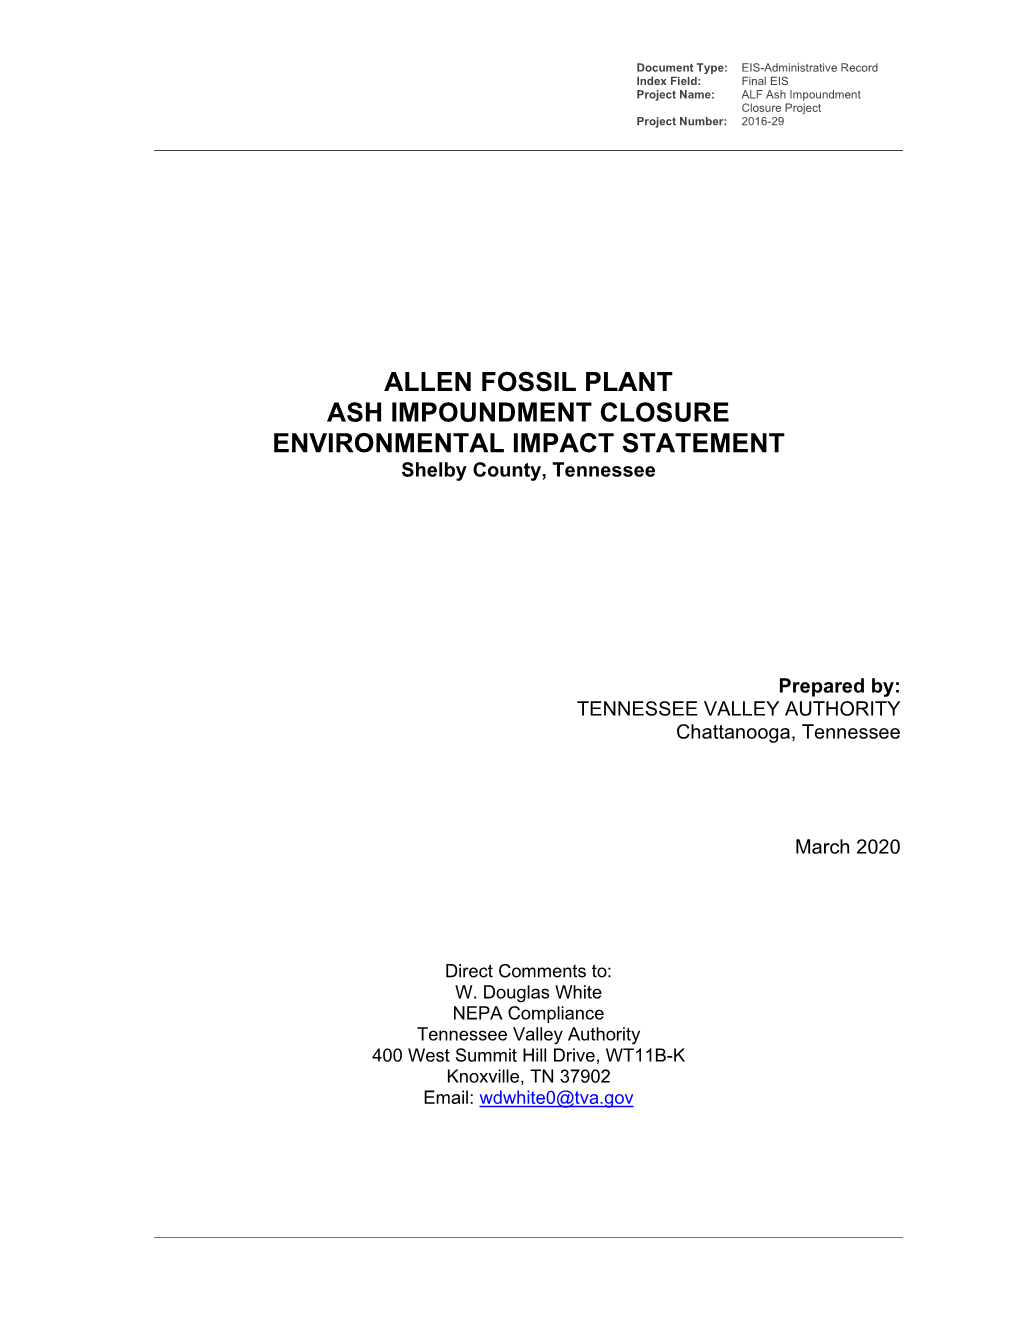 ALLEN FOSSIL PLANT ASH IMPOUNDMENT CLOSURE ENVIRONMENTAL IMPACT STATEMENT Shelby County, Tennessee